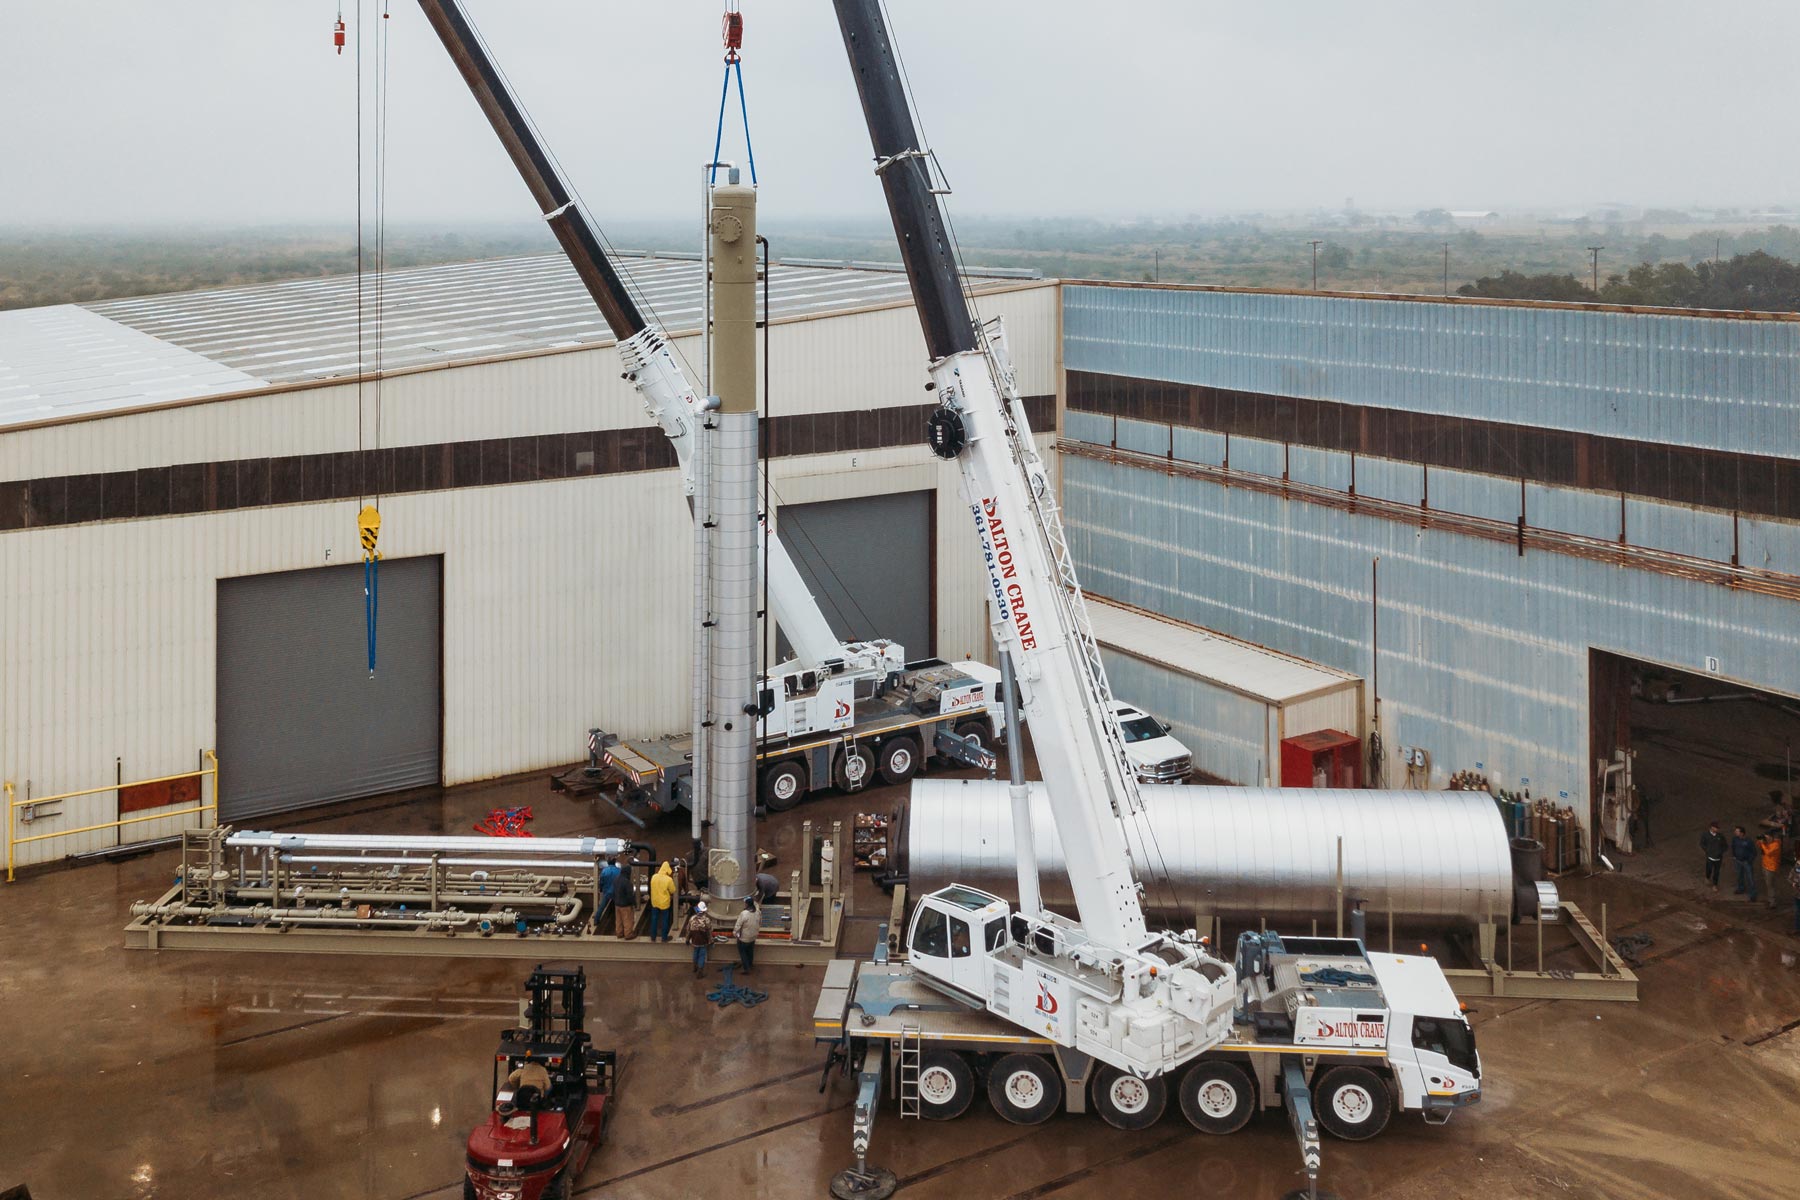 Crane lifting a large cylindrical structure outside an industrial warehouse on a cloudy day.